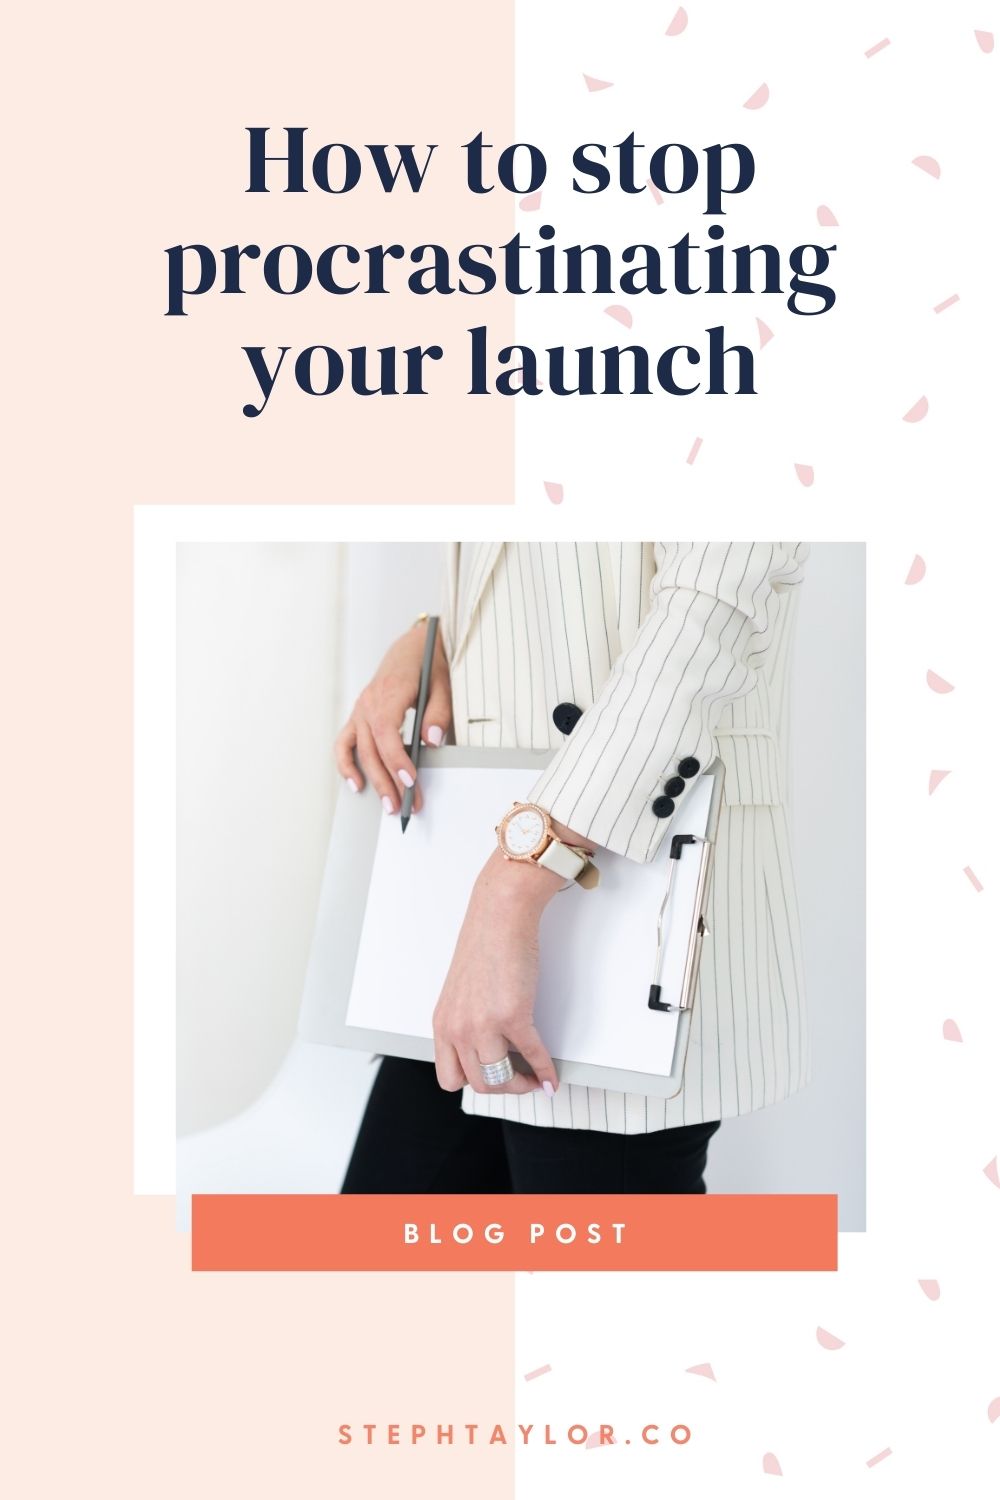 How to stop procrastinating your launch